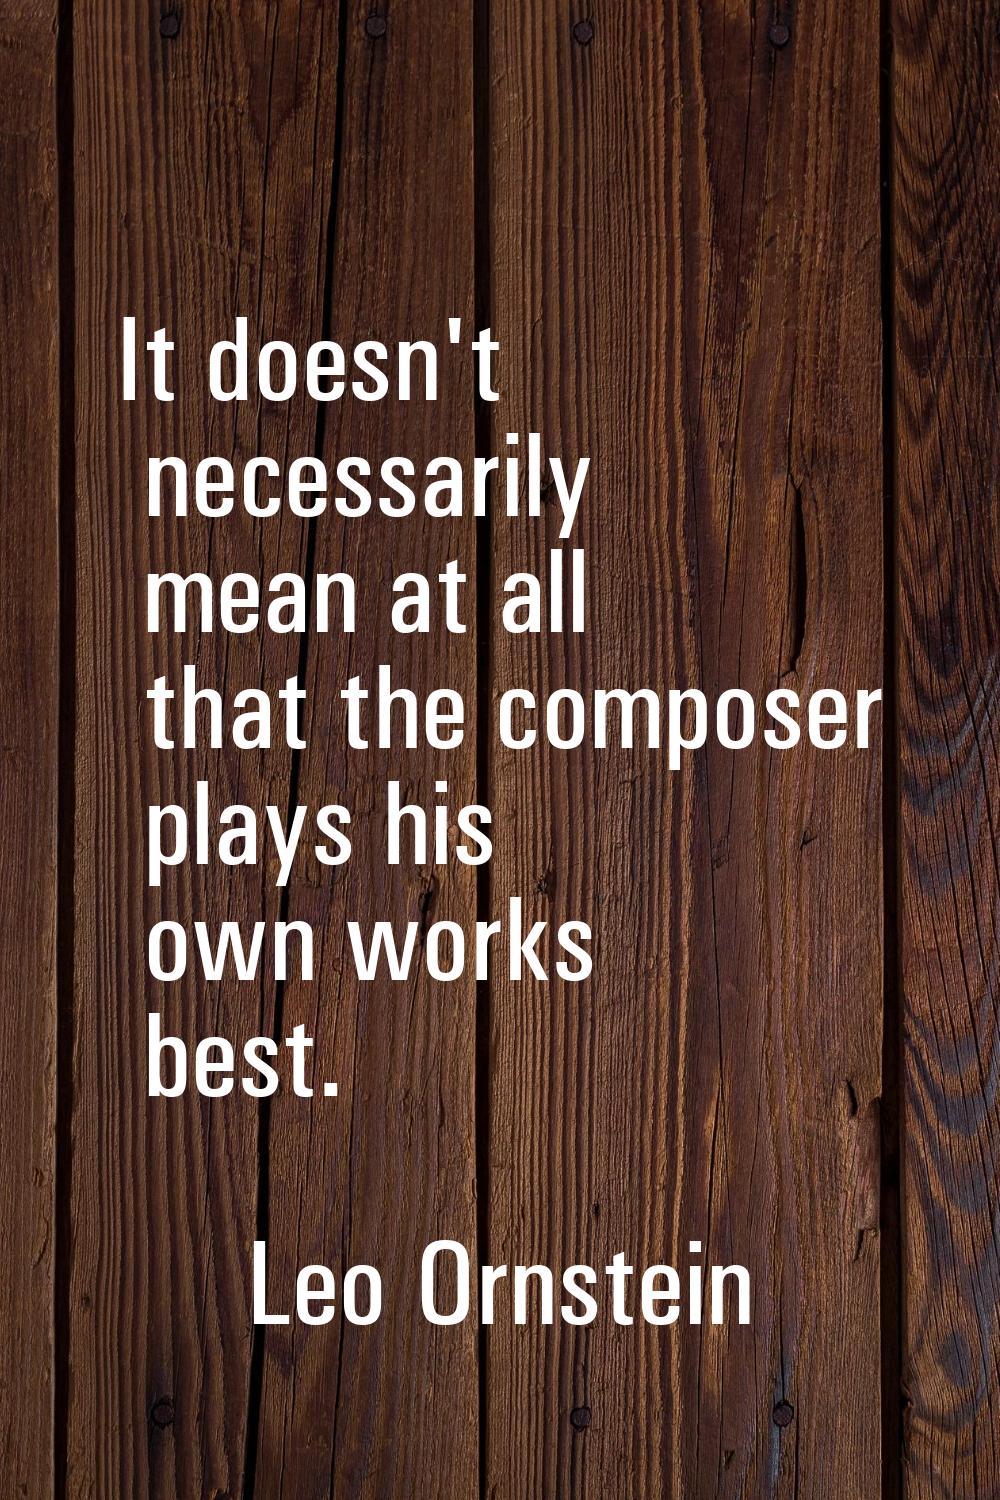 It doesn't necessarily mean at all that the composer plays his own works best.